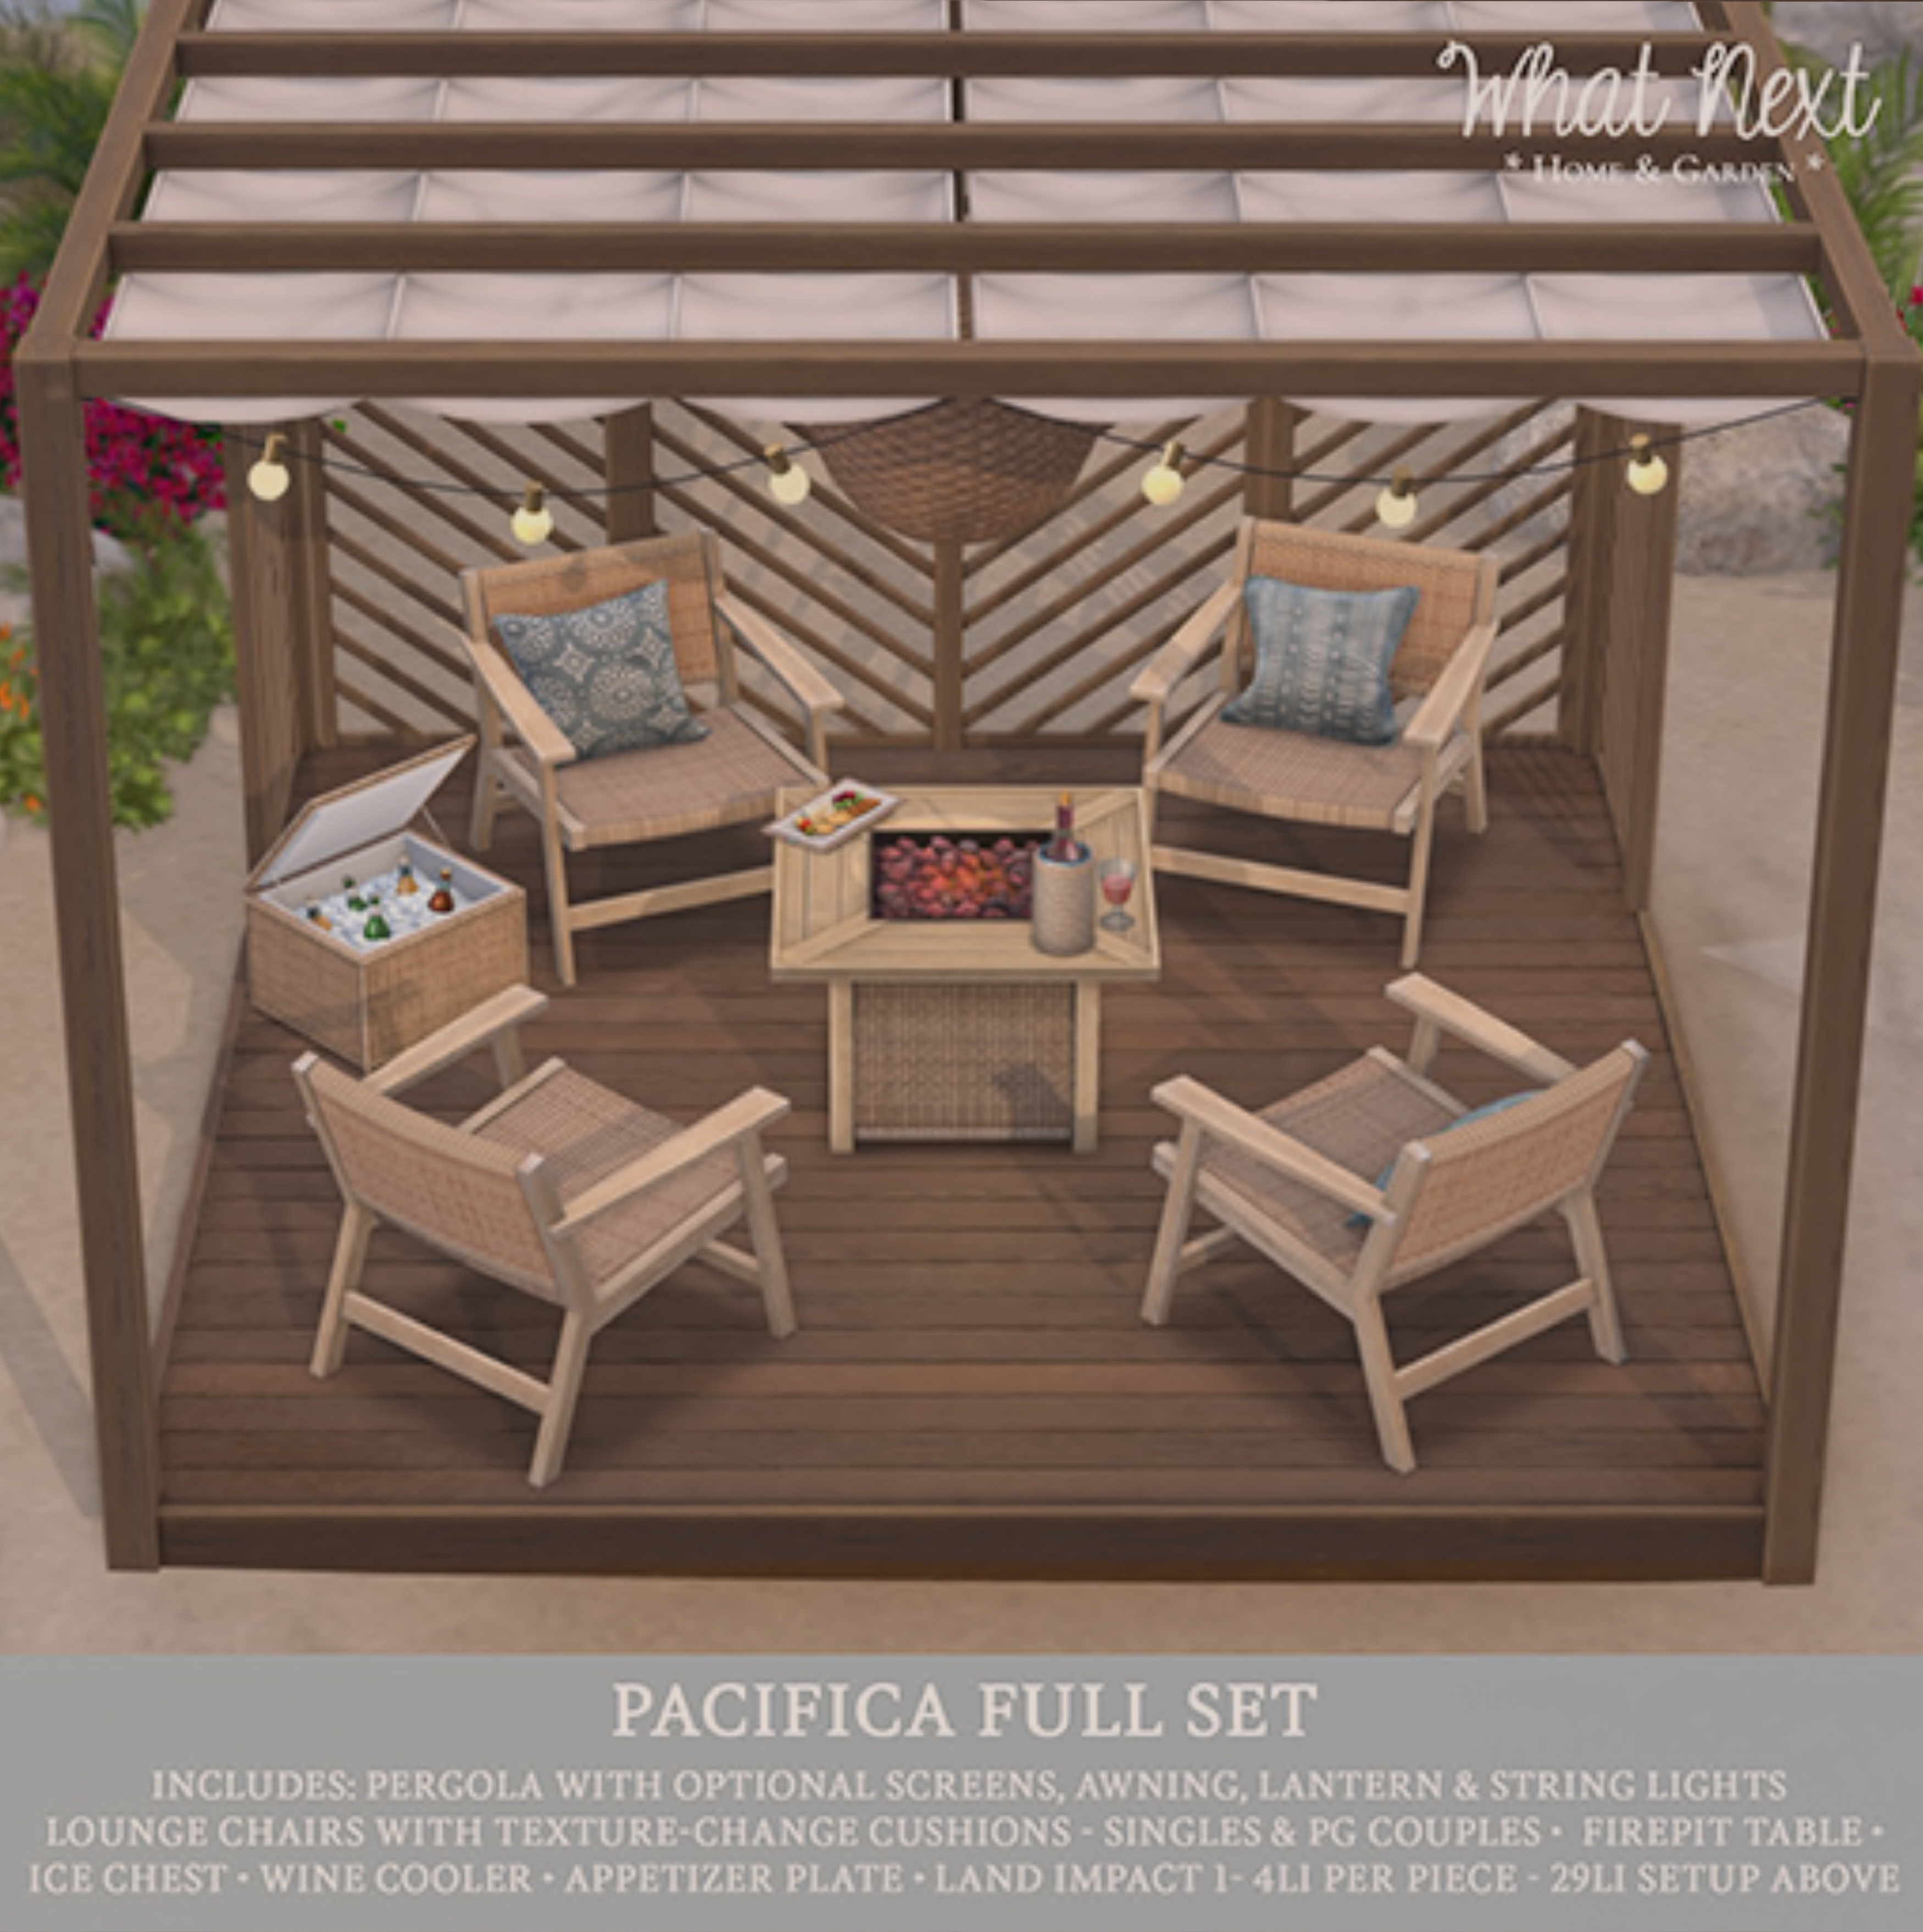 What Next – Pacifica Set